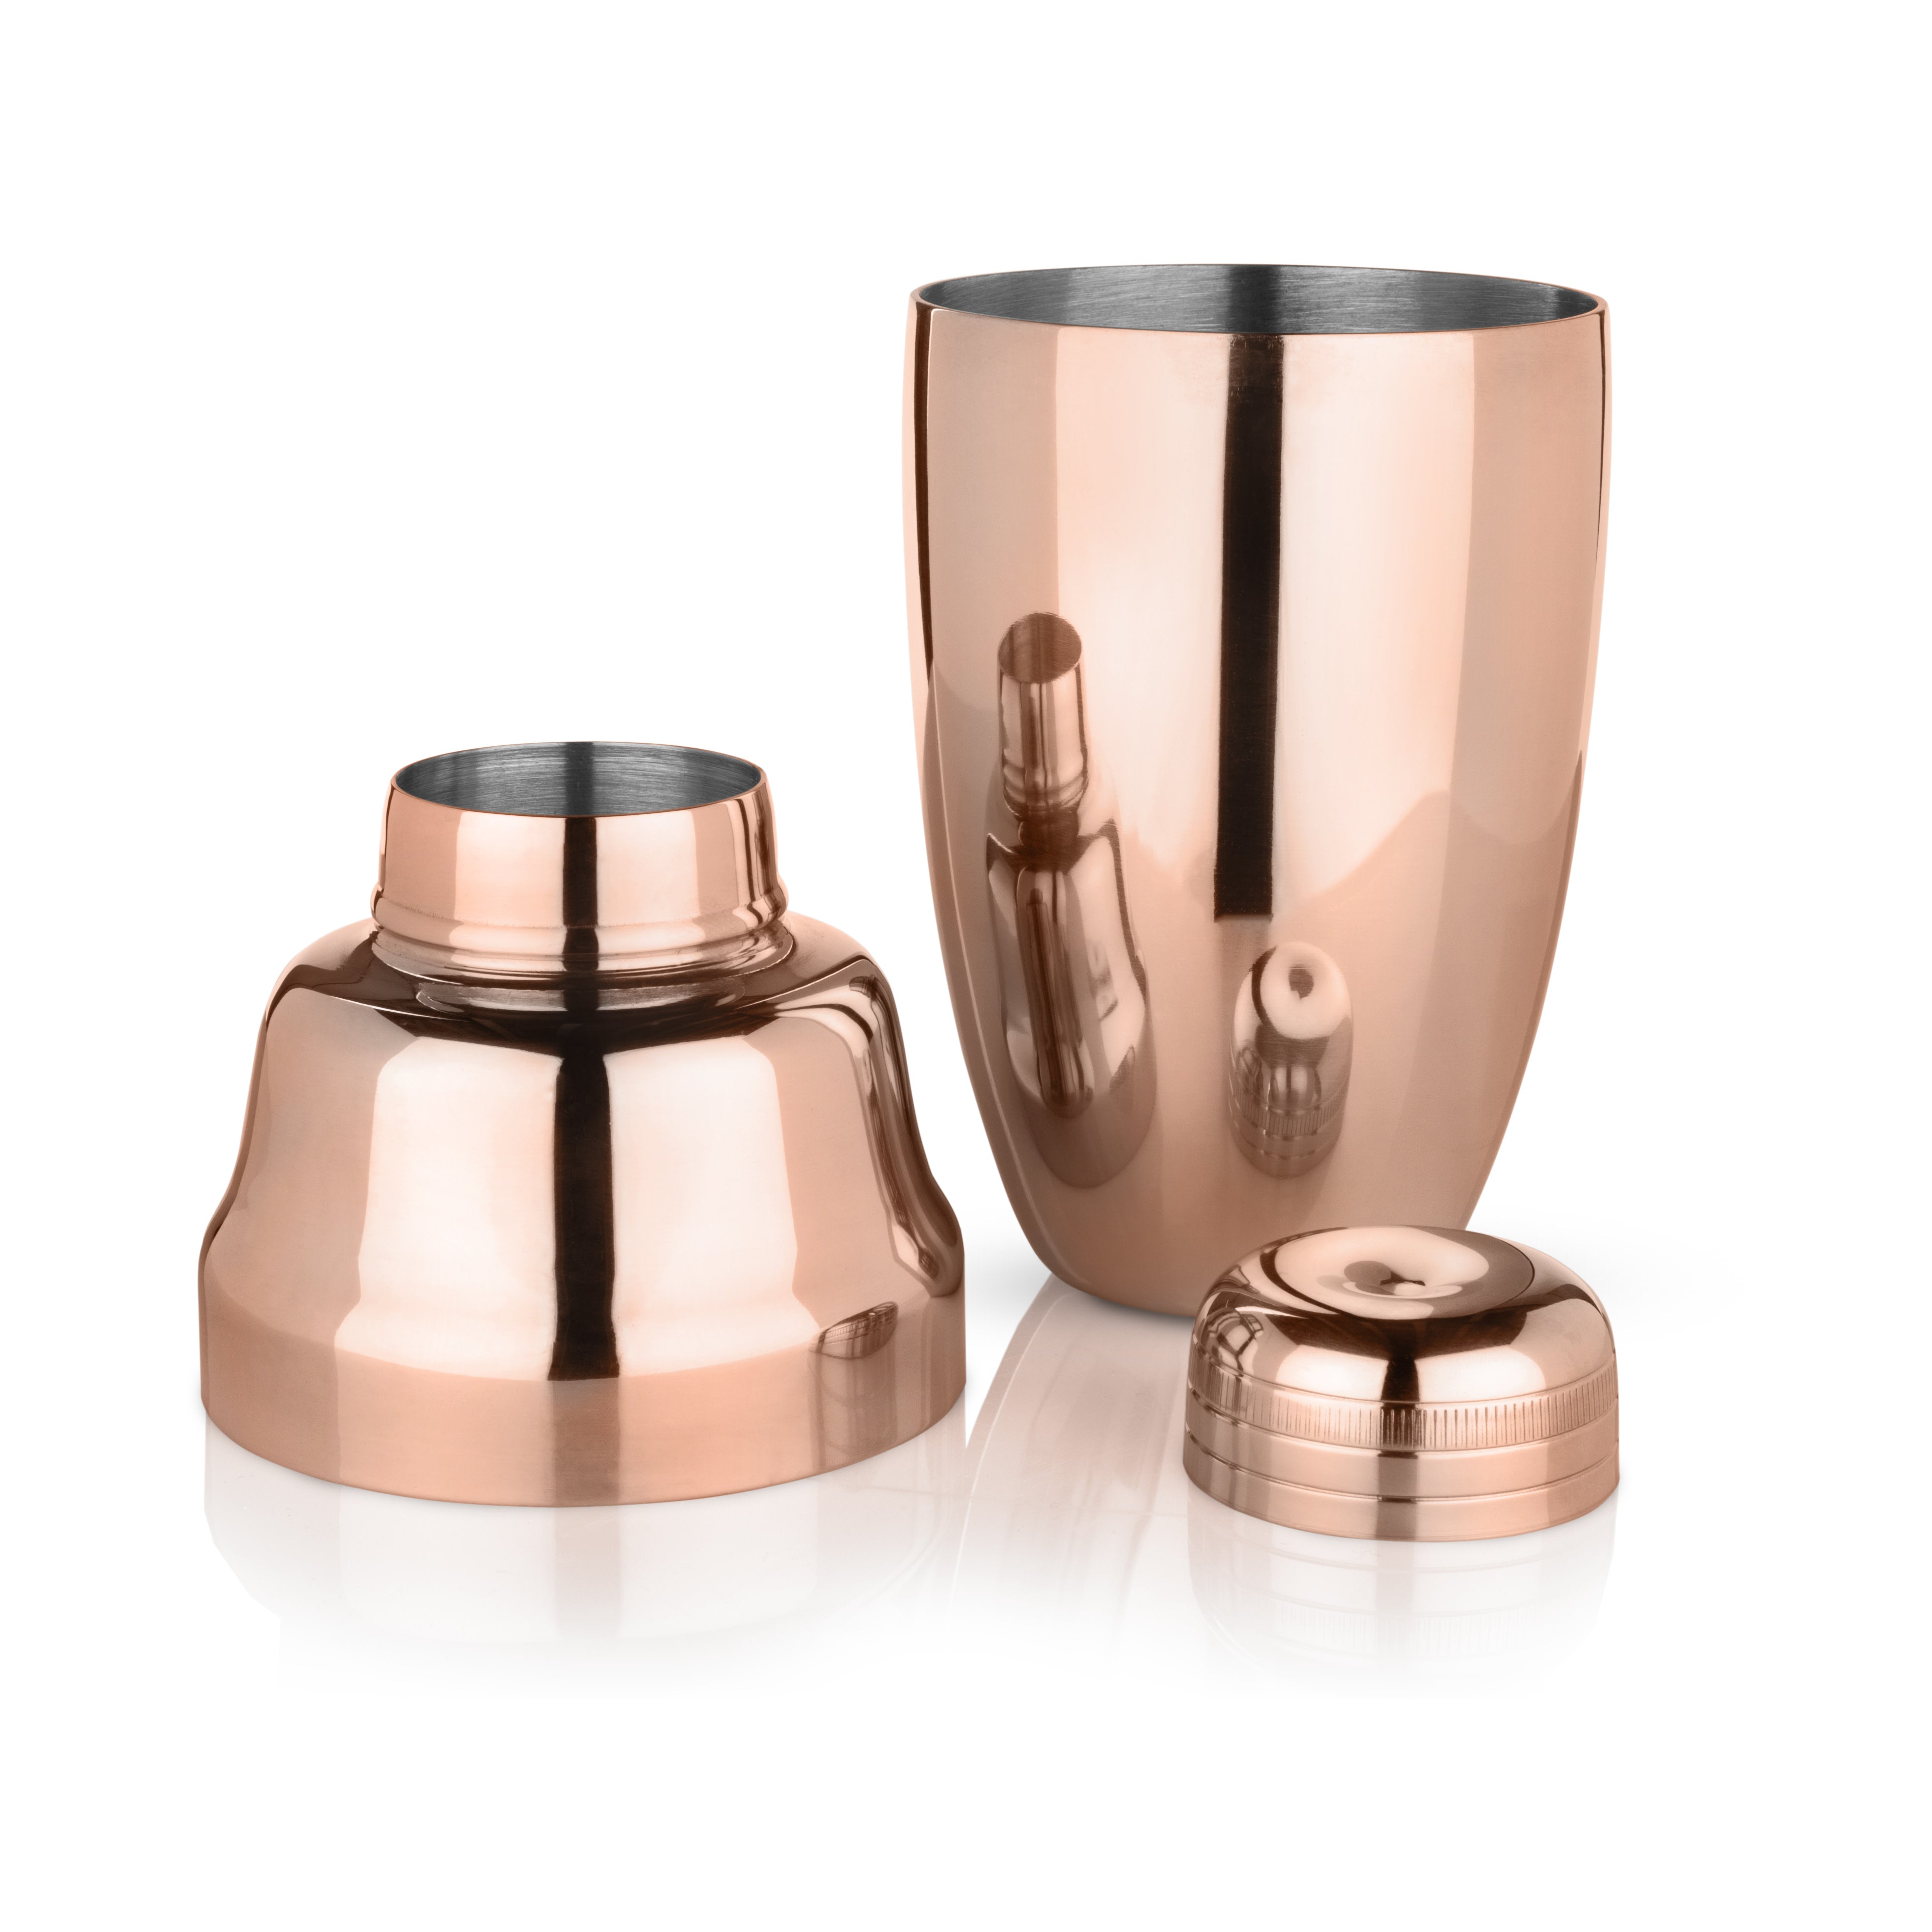 Viski Copper Heavyweight Cocktail Shaker, Stainless Drink Mixer, with Strainer, Professional Shaker for Martini and Margarita, Polished Copper Finish, 16.5 oz